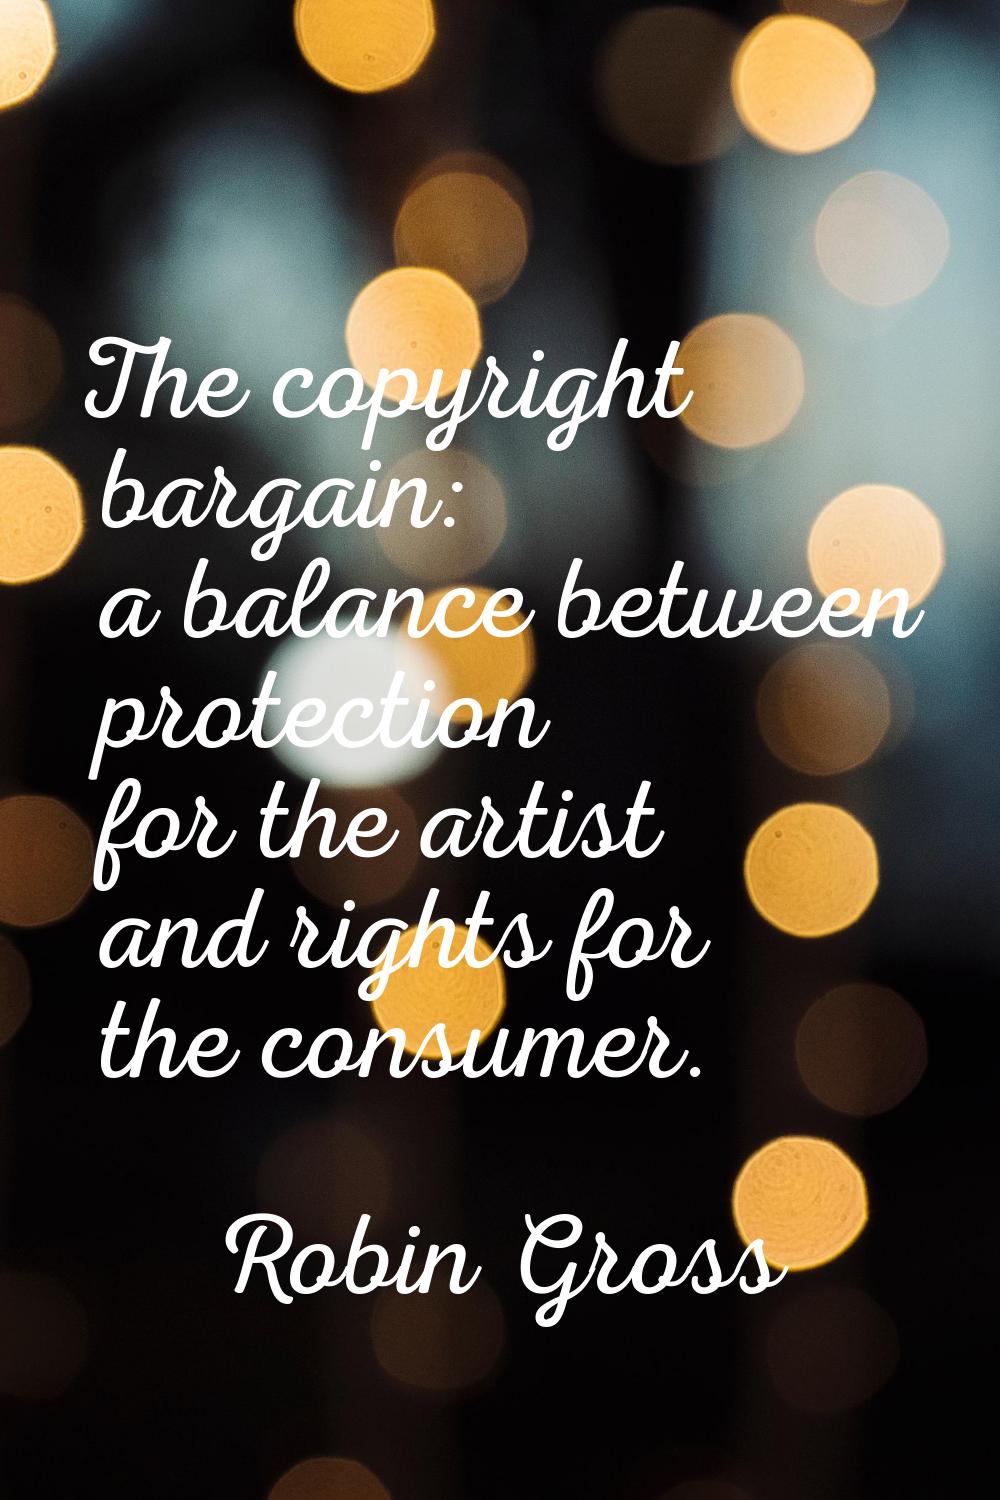 The copyright bargain: a balance between protection for the artist and rights for the consumer.